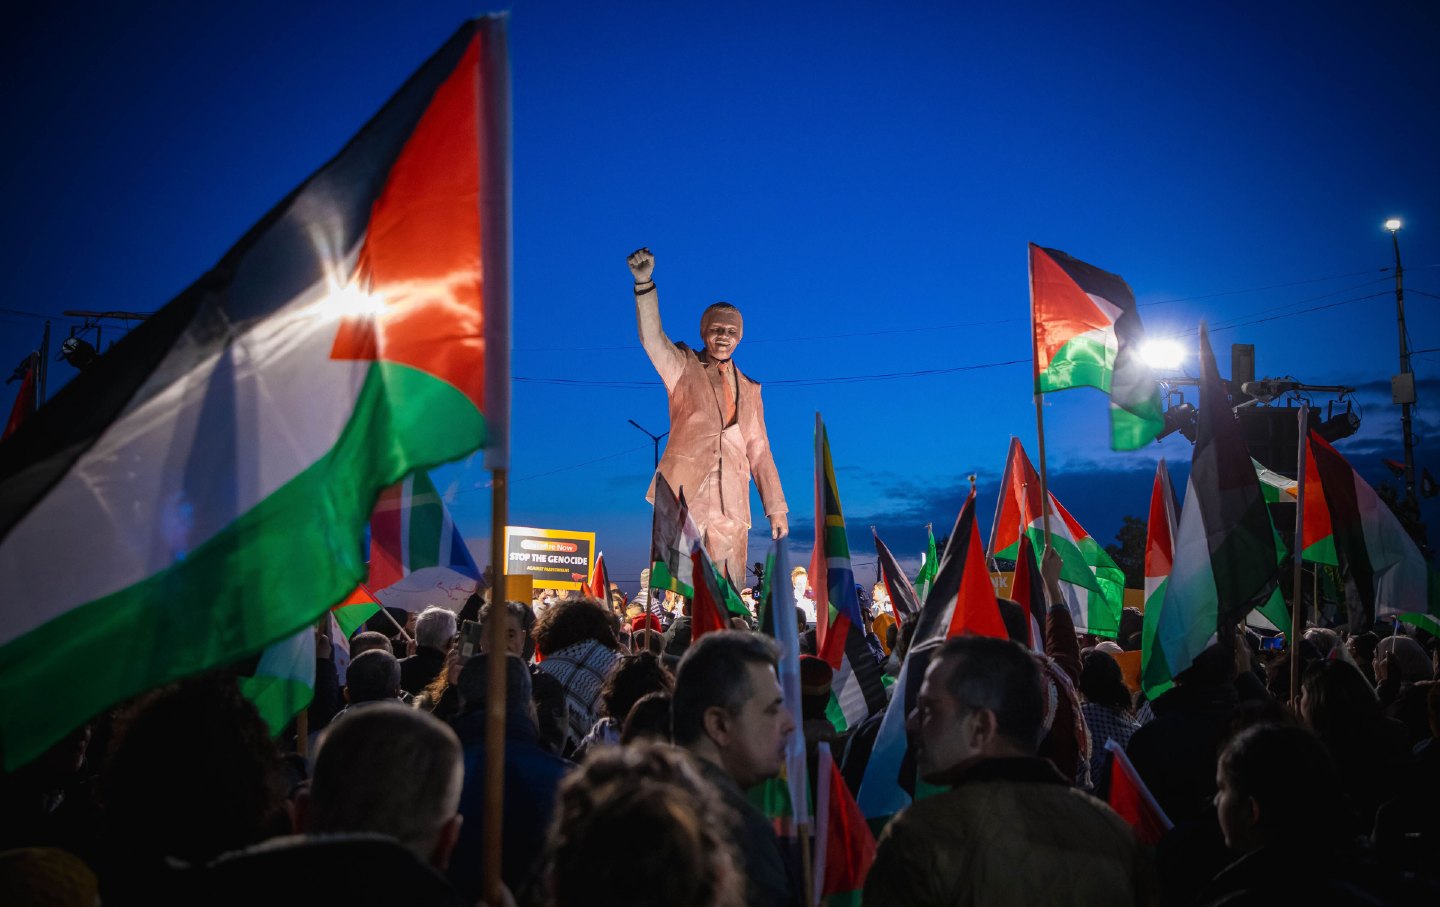 Palestinians carrying flags and banners gather at the Nelson Mandela Square to demonstrate in support of the genocide case filed by South Africa against Israel at the International Court of Justice, on January 10, 2024, in Ramallah, the West Bank.